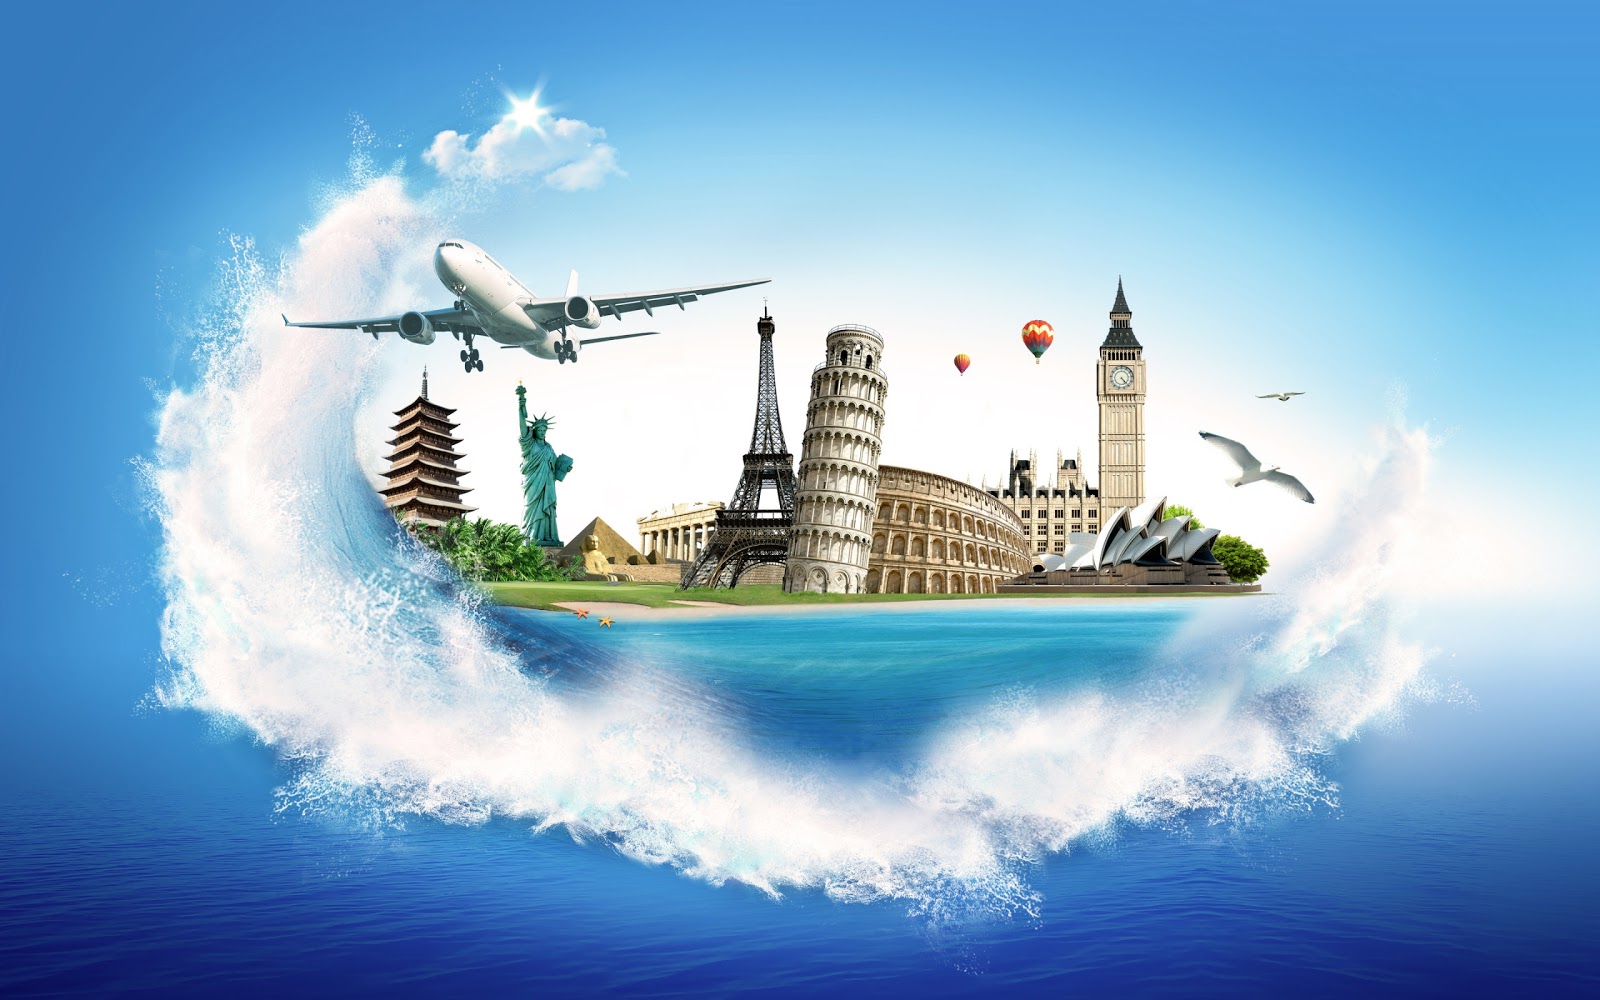 travel trade sector